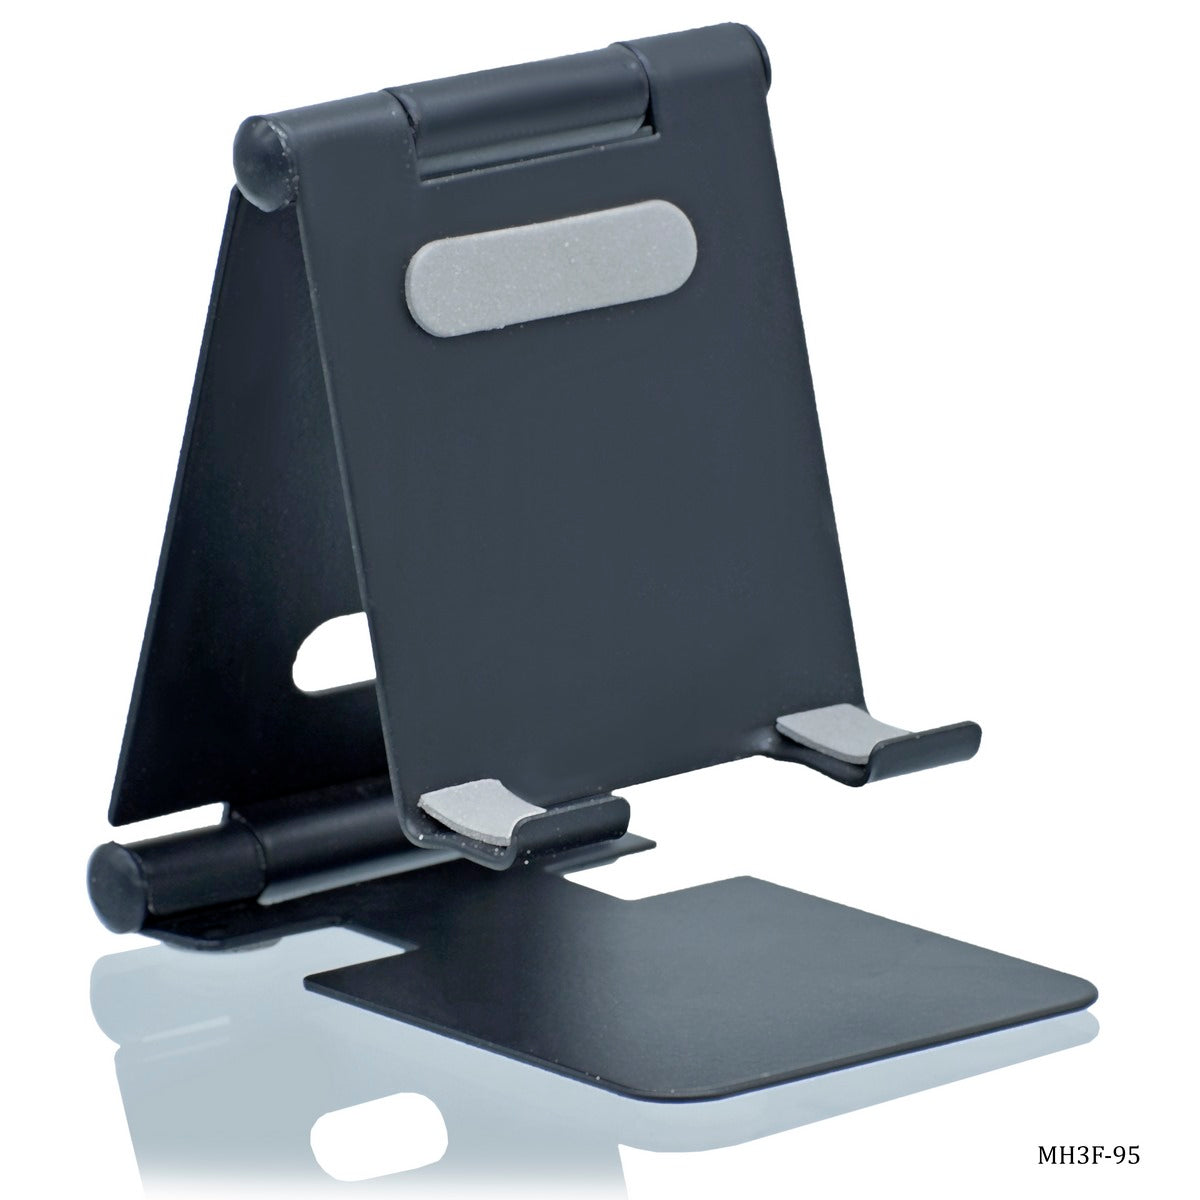 Personalized Folding Black Metal Mobile Phone Holder Stand - For Personal, Corporate Gifting, Return Gift, Event Gifting, Promotional Freebies JAMH3F-95